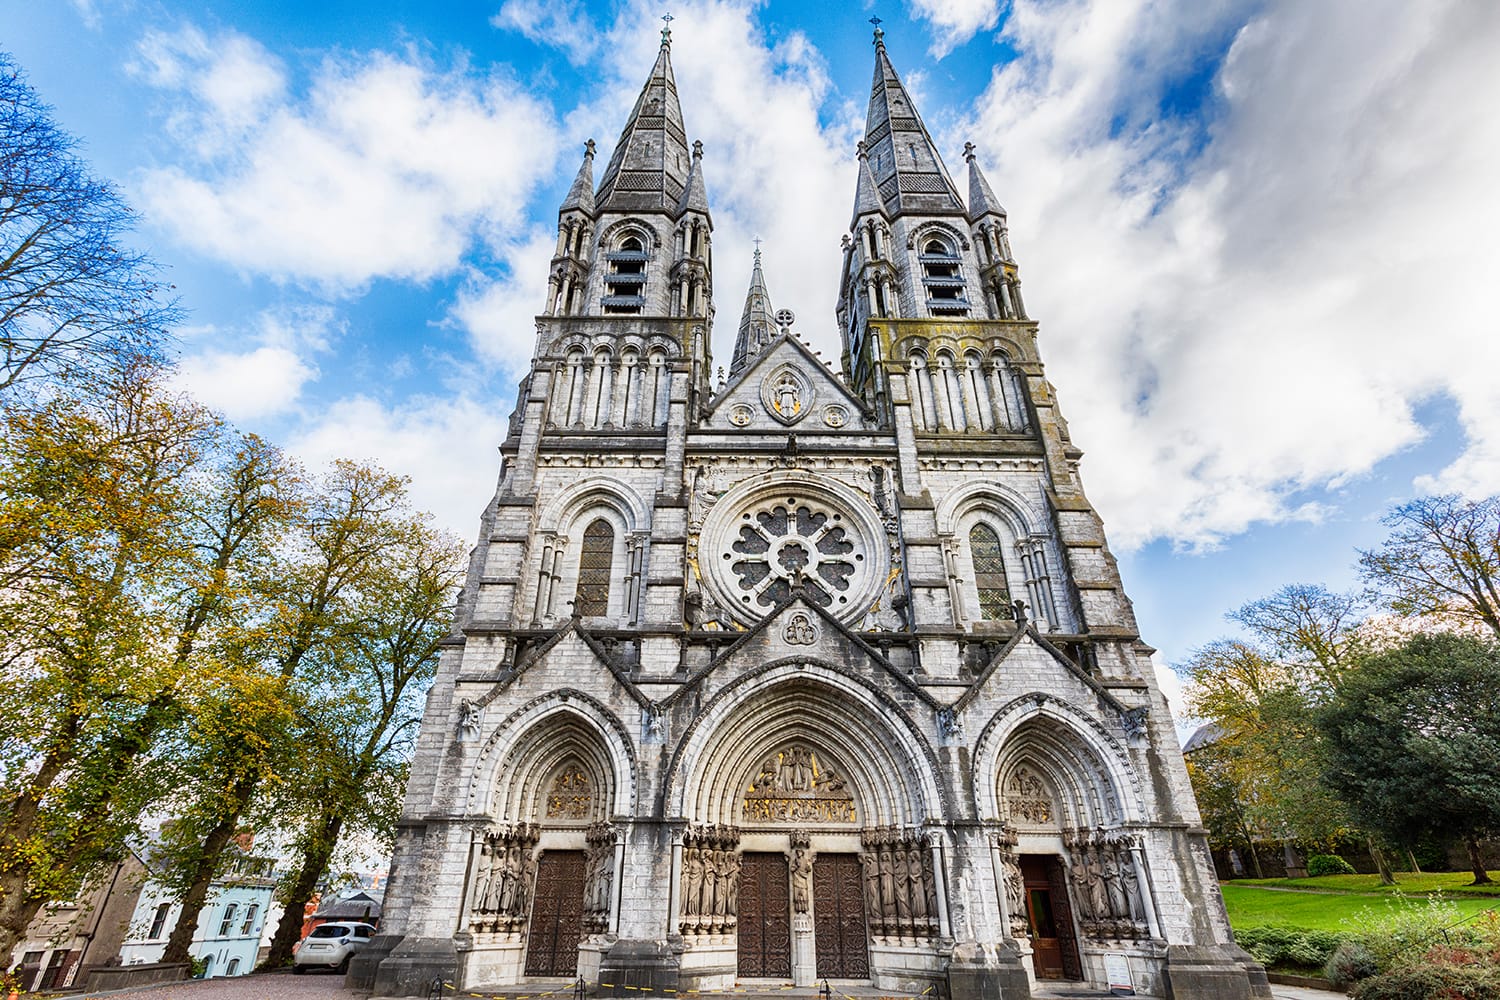 Facade of St. Fin Barre's Cathedral in Cork, Ireland